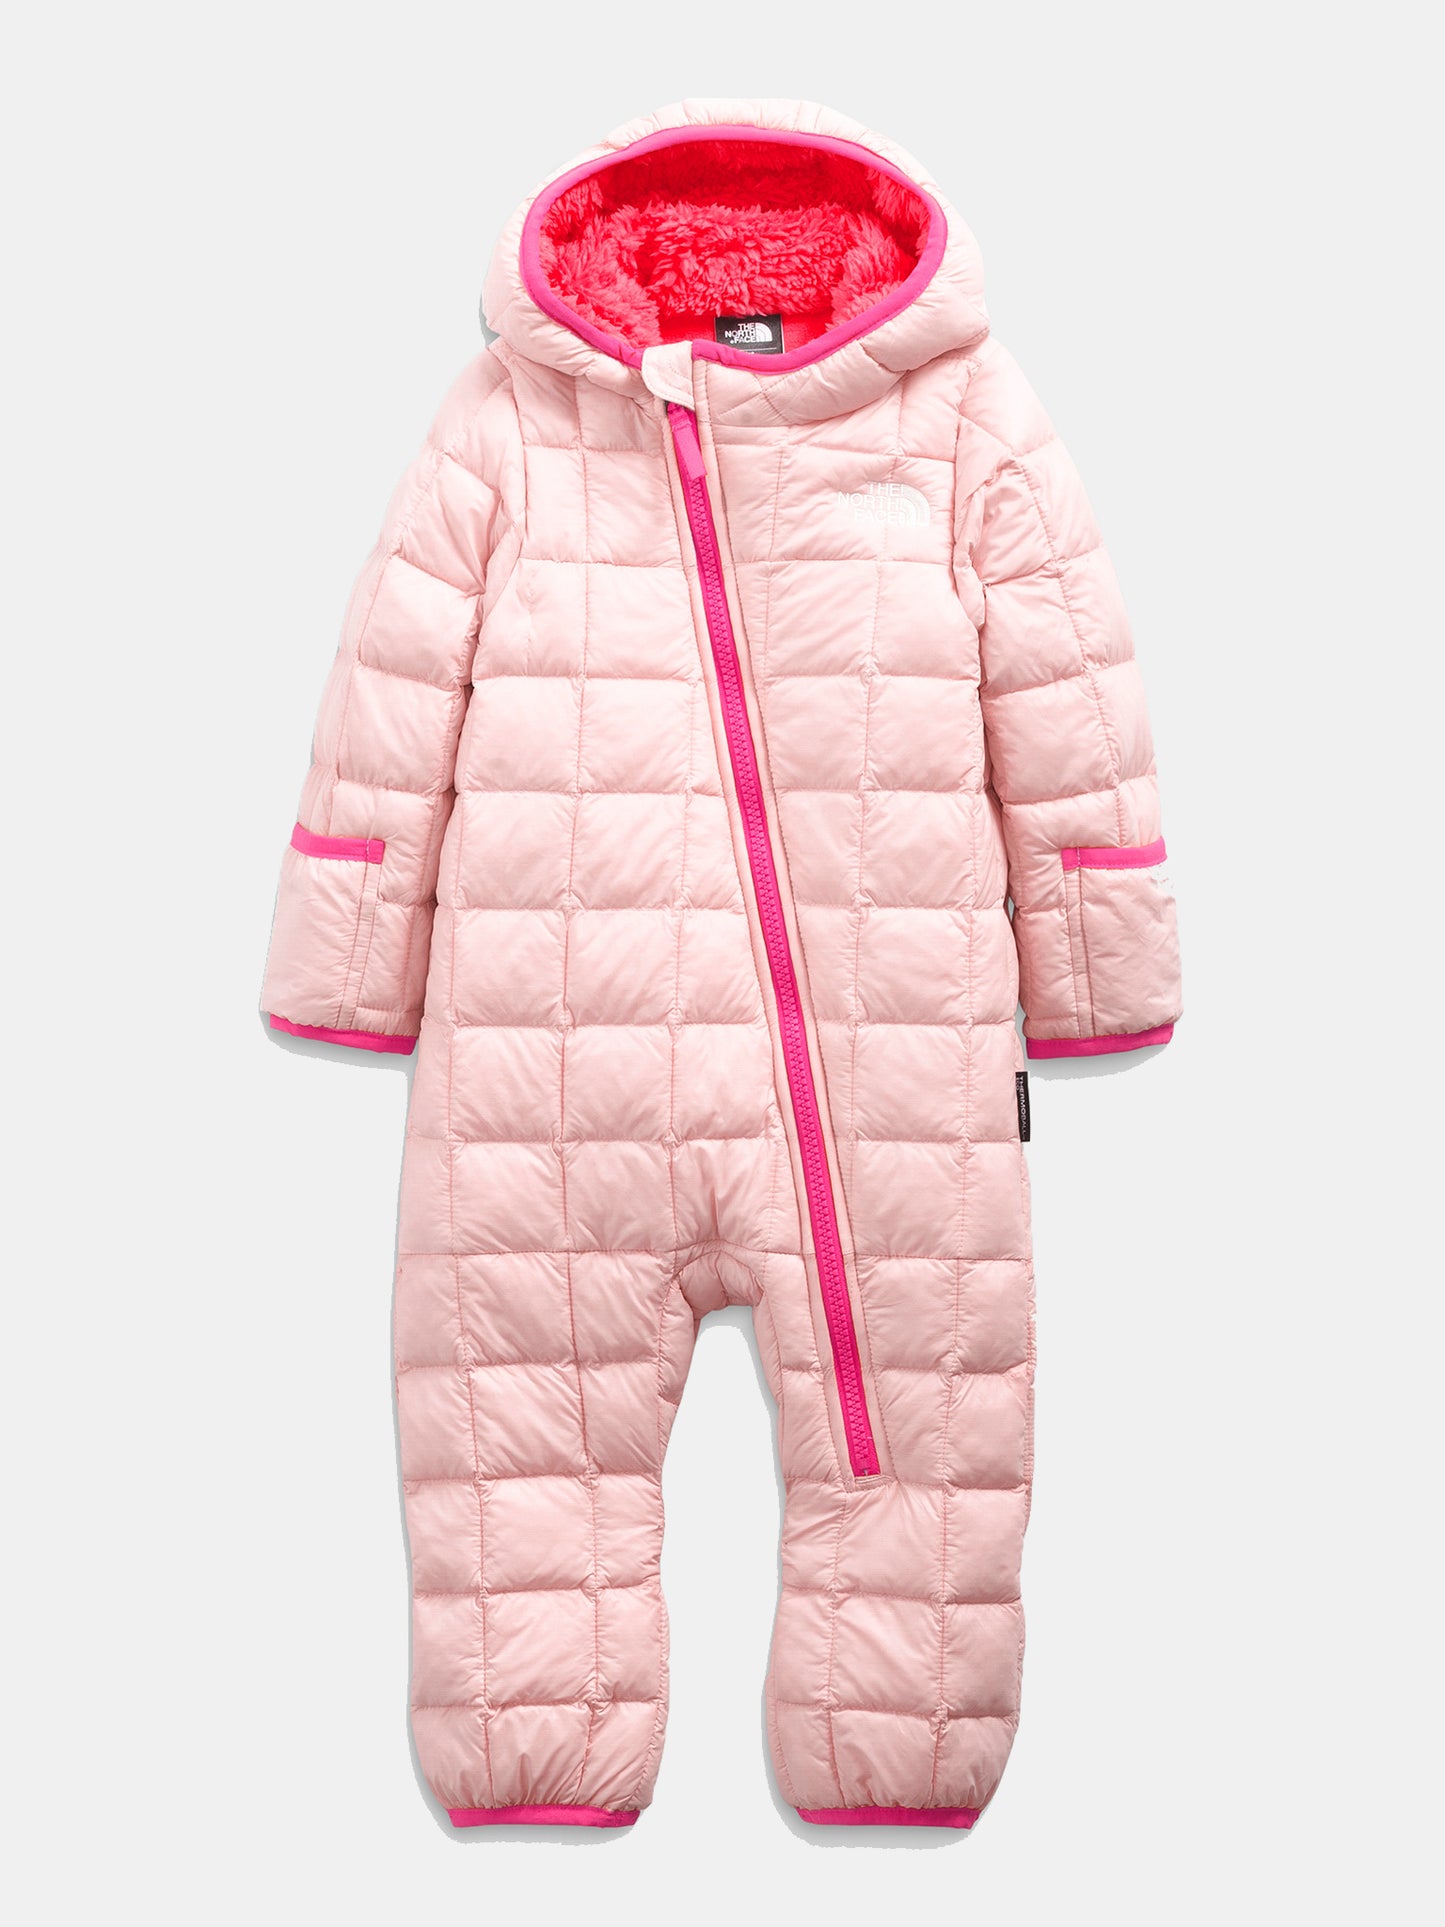 The North Face Infant ThermoBall Eco Bunting